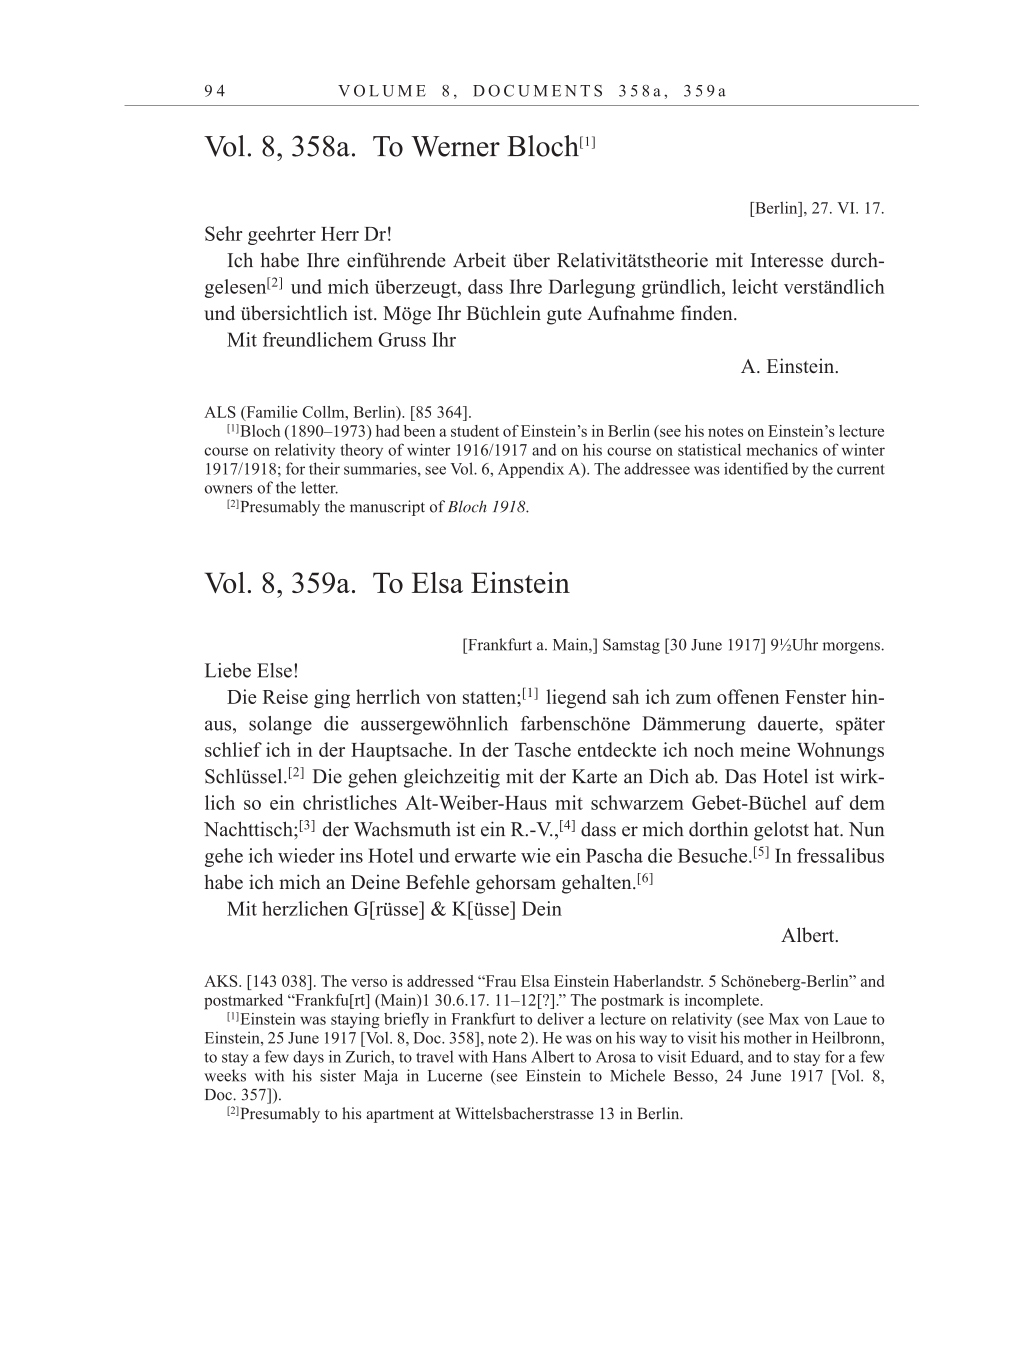 Volume 10: The Berlin Years: Correspondence May-December 1920 / Supplementary Correspondence 1909-1920 page 94